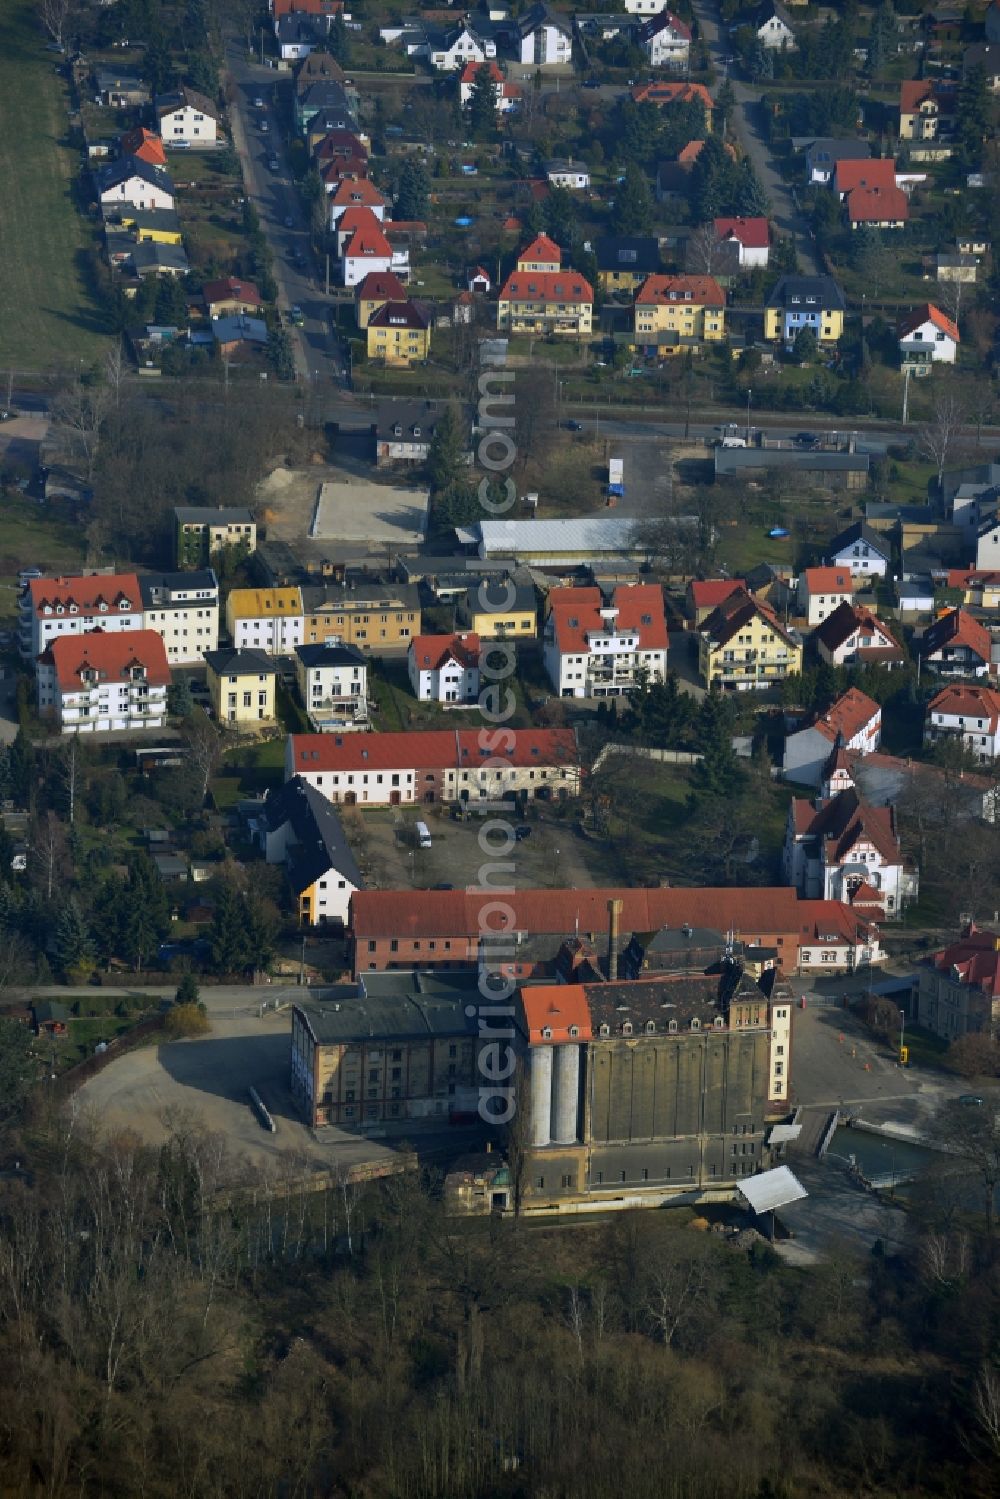 Aerial image Stahmeln - On the historic grounds of the mill Stahmeln near Leipzig in Saxony flour is still produced today. It is driven by the water mill of the White Elster, which also moves the turbines of a small hydroelectric power plant. The building complex includes the mill building with flour transport and staircase tower, the grain elevator, the former stables, the administration building, the following house and the former villa of the mill owner